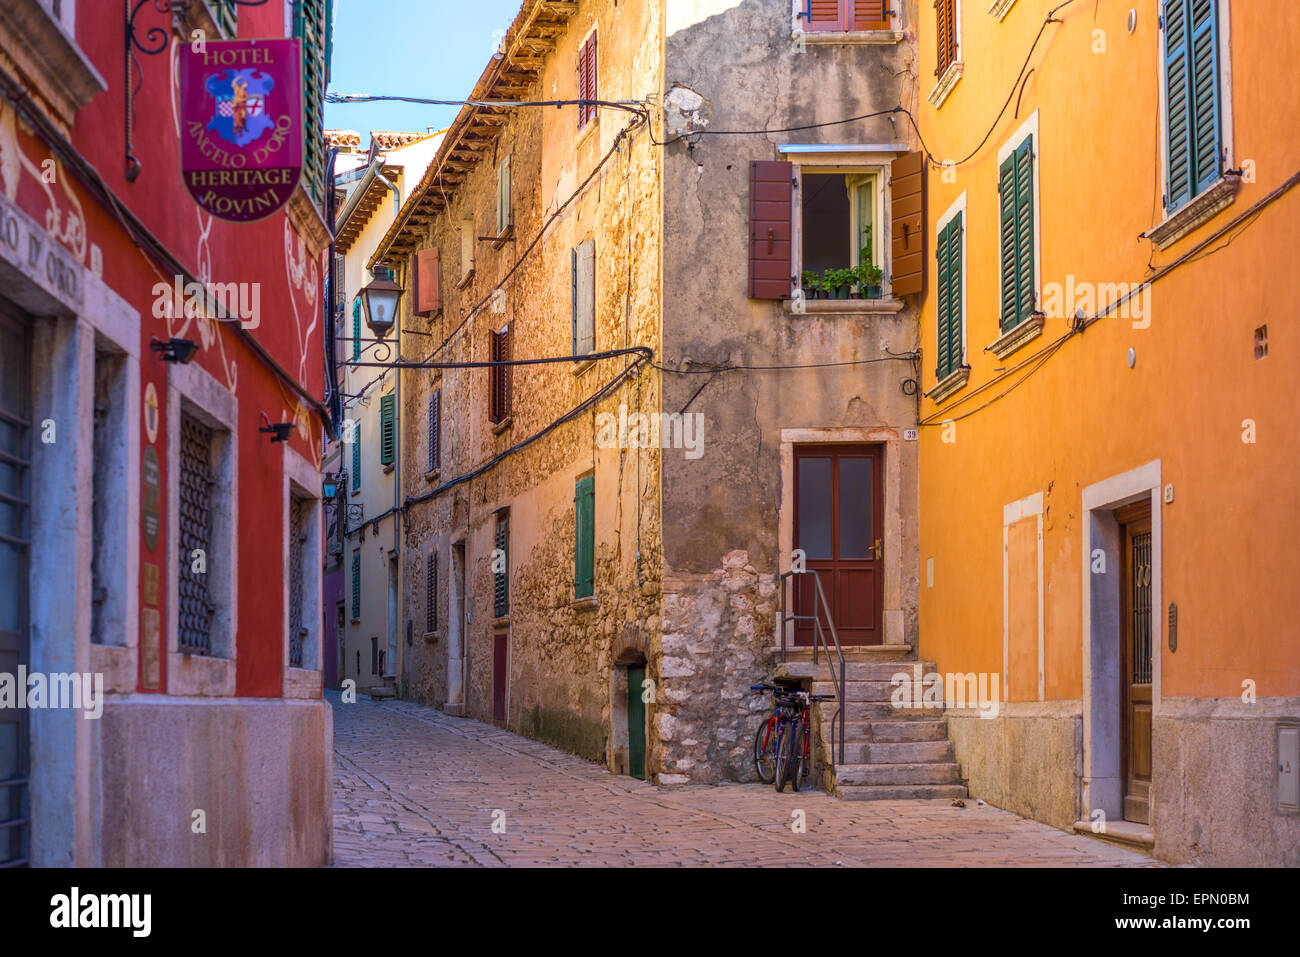 Early morning sun radiates in the narrow streets of brightly coloured venetian styled buildings, creating atmosphere and beauty Stock Photo